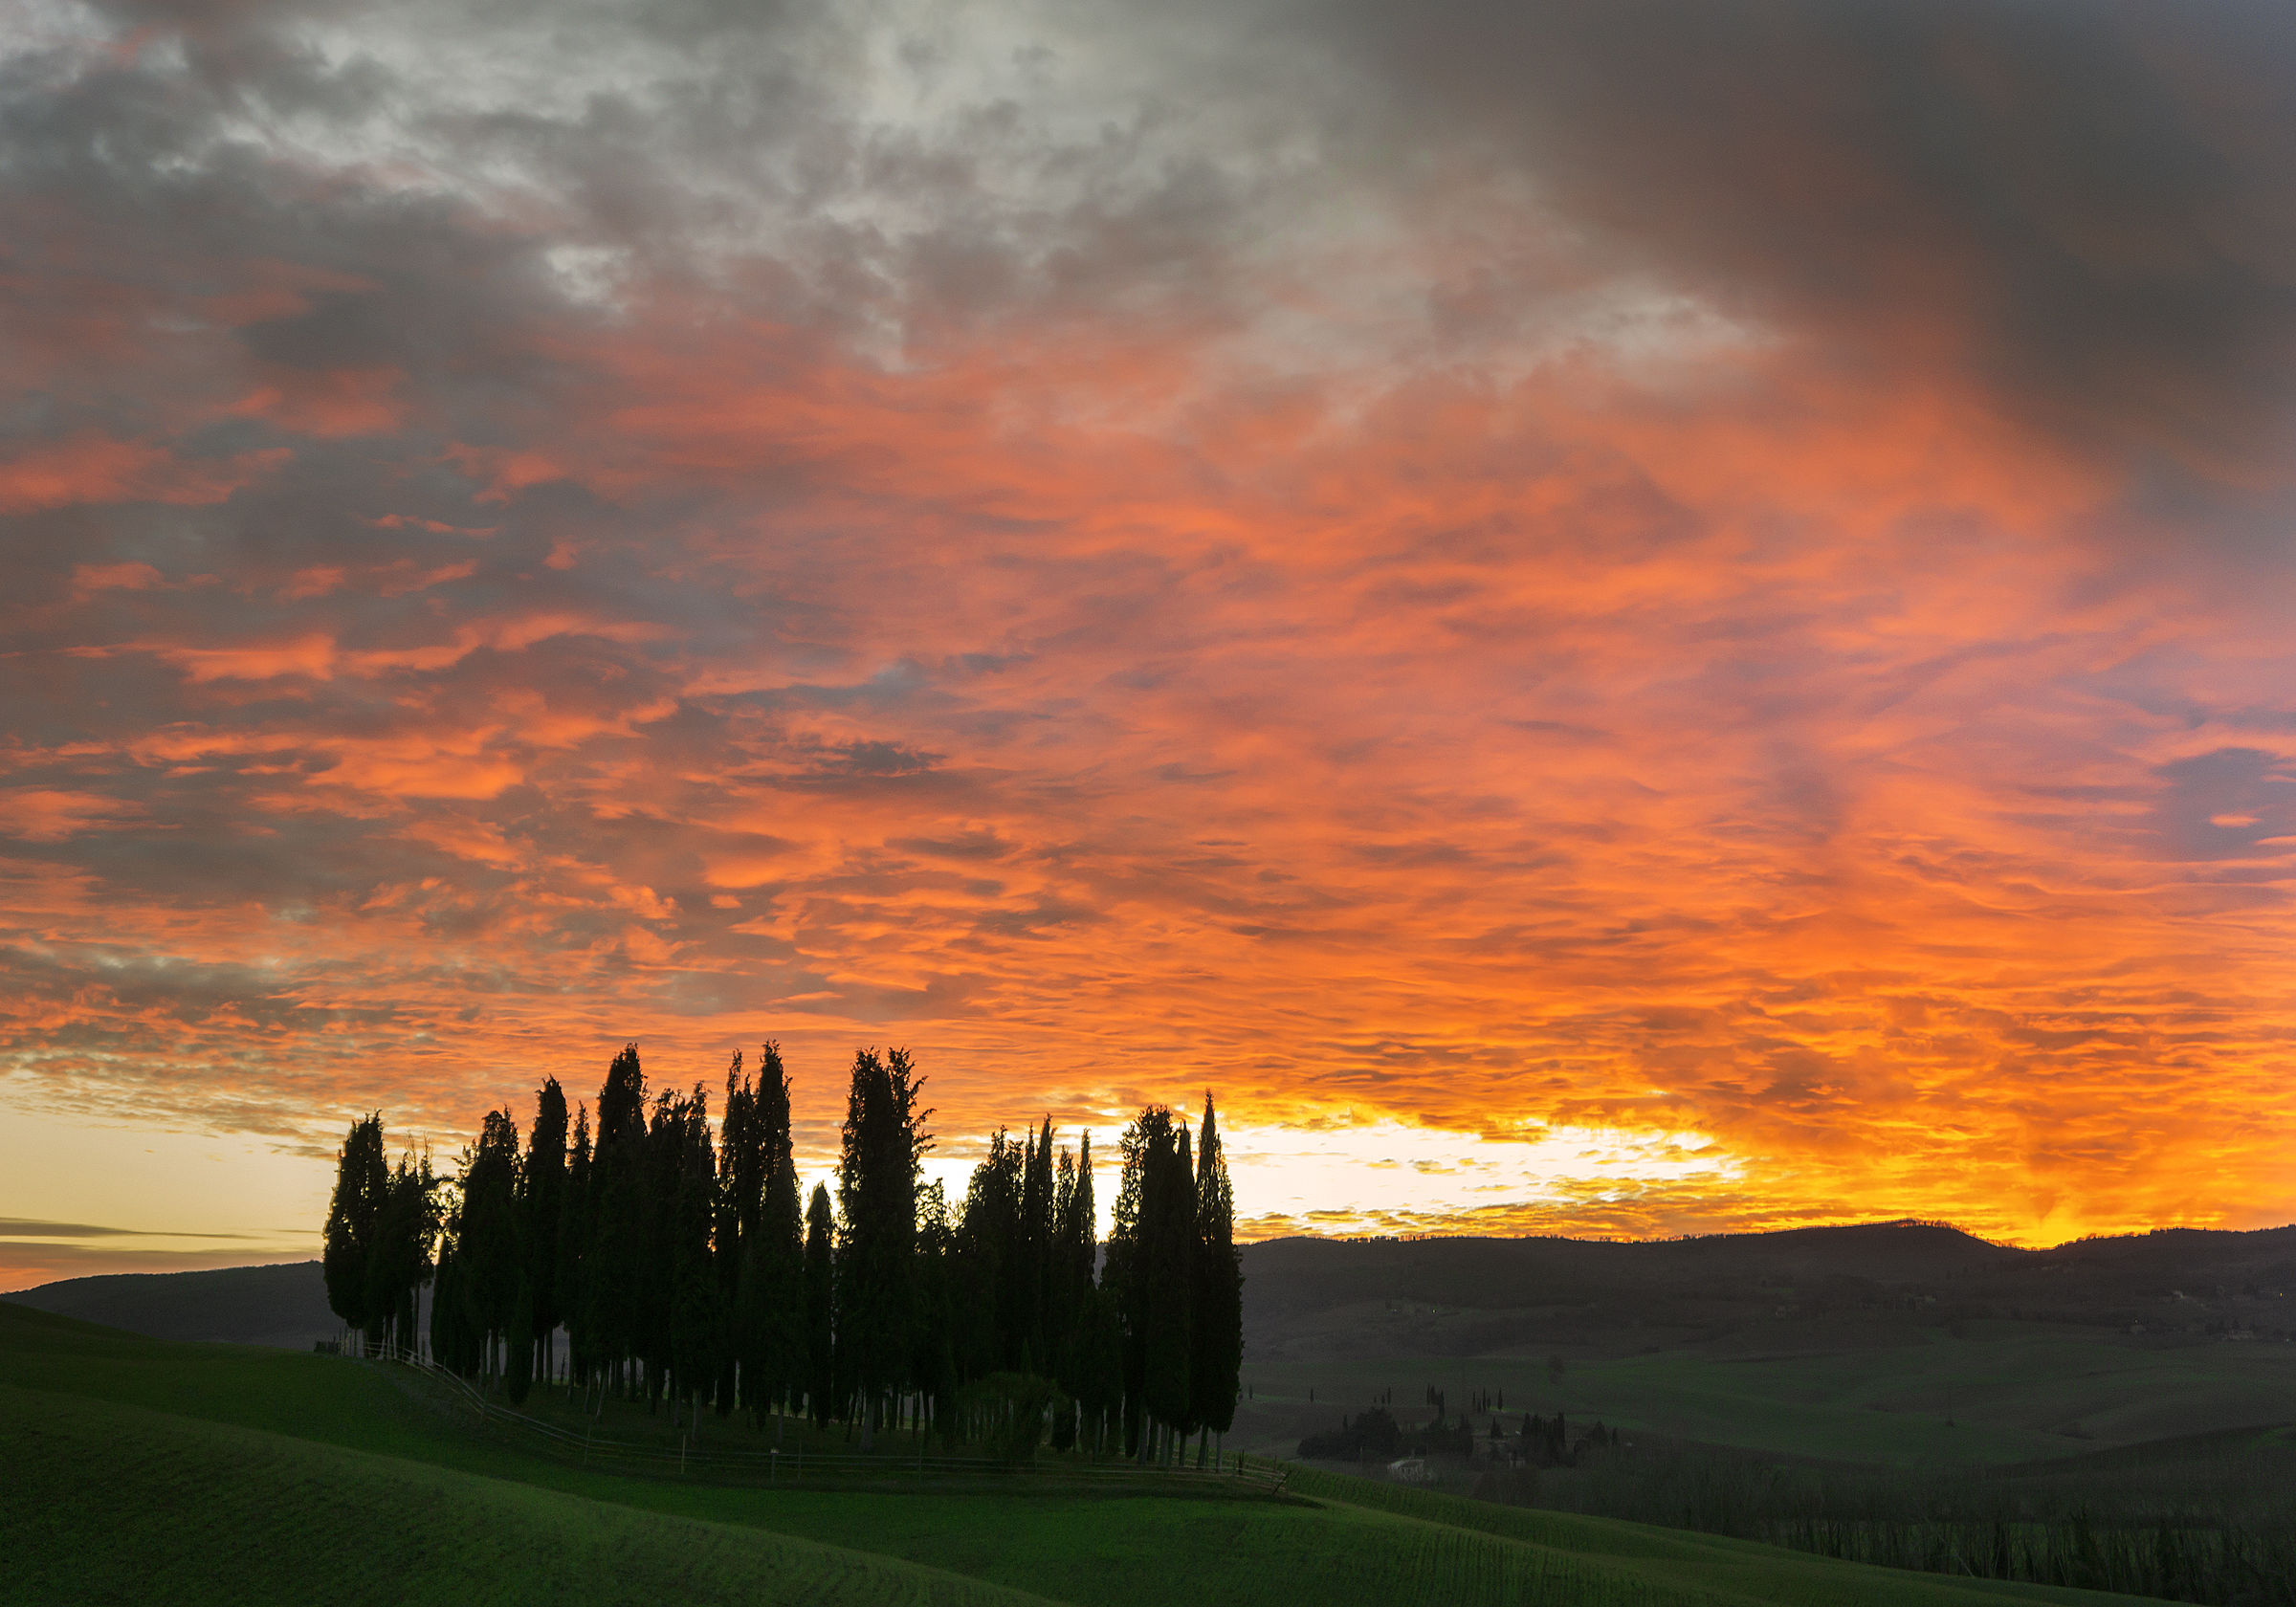 A sunset in the Val d'Orcia...